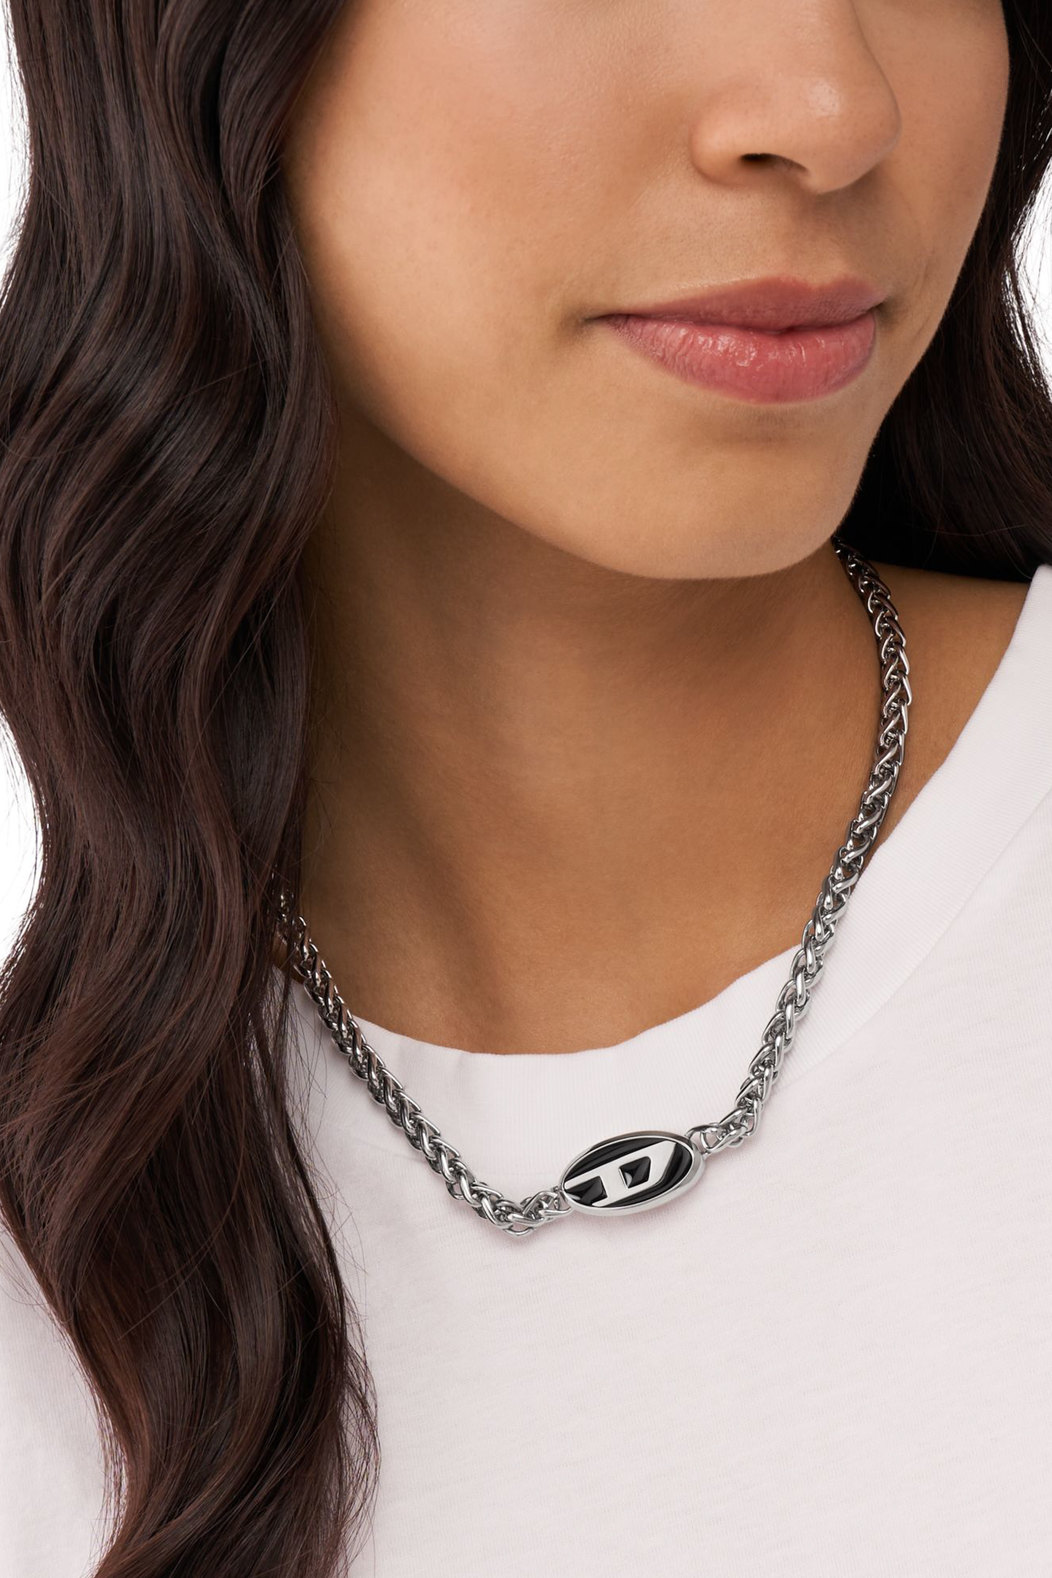 Stainless steel chain necklace